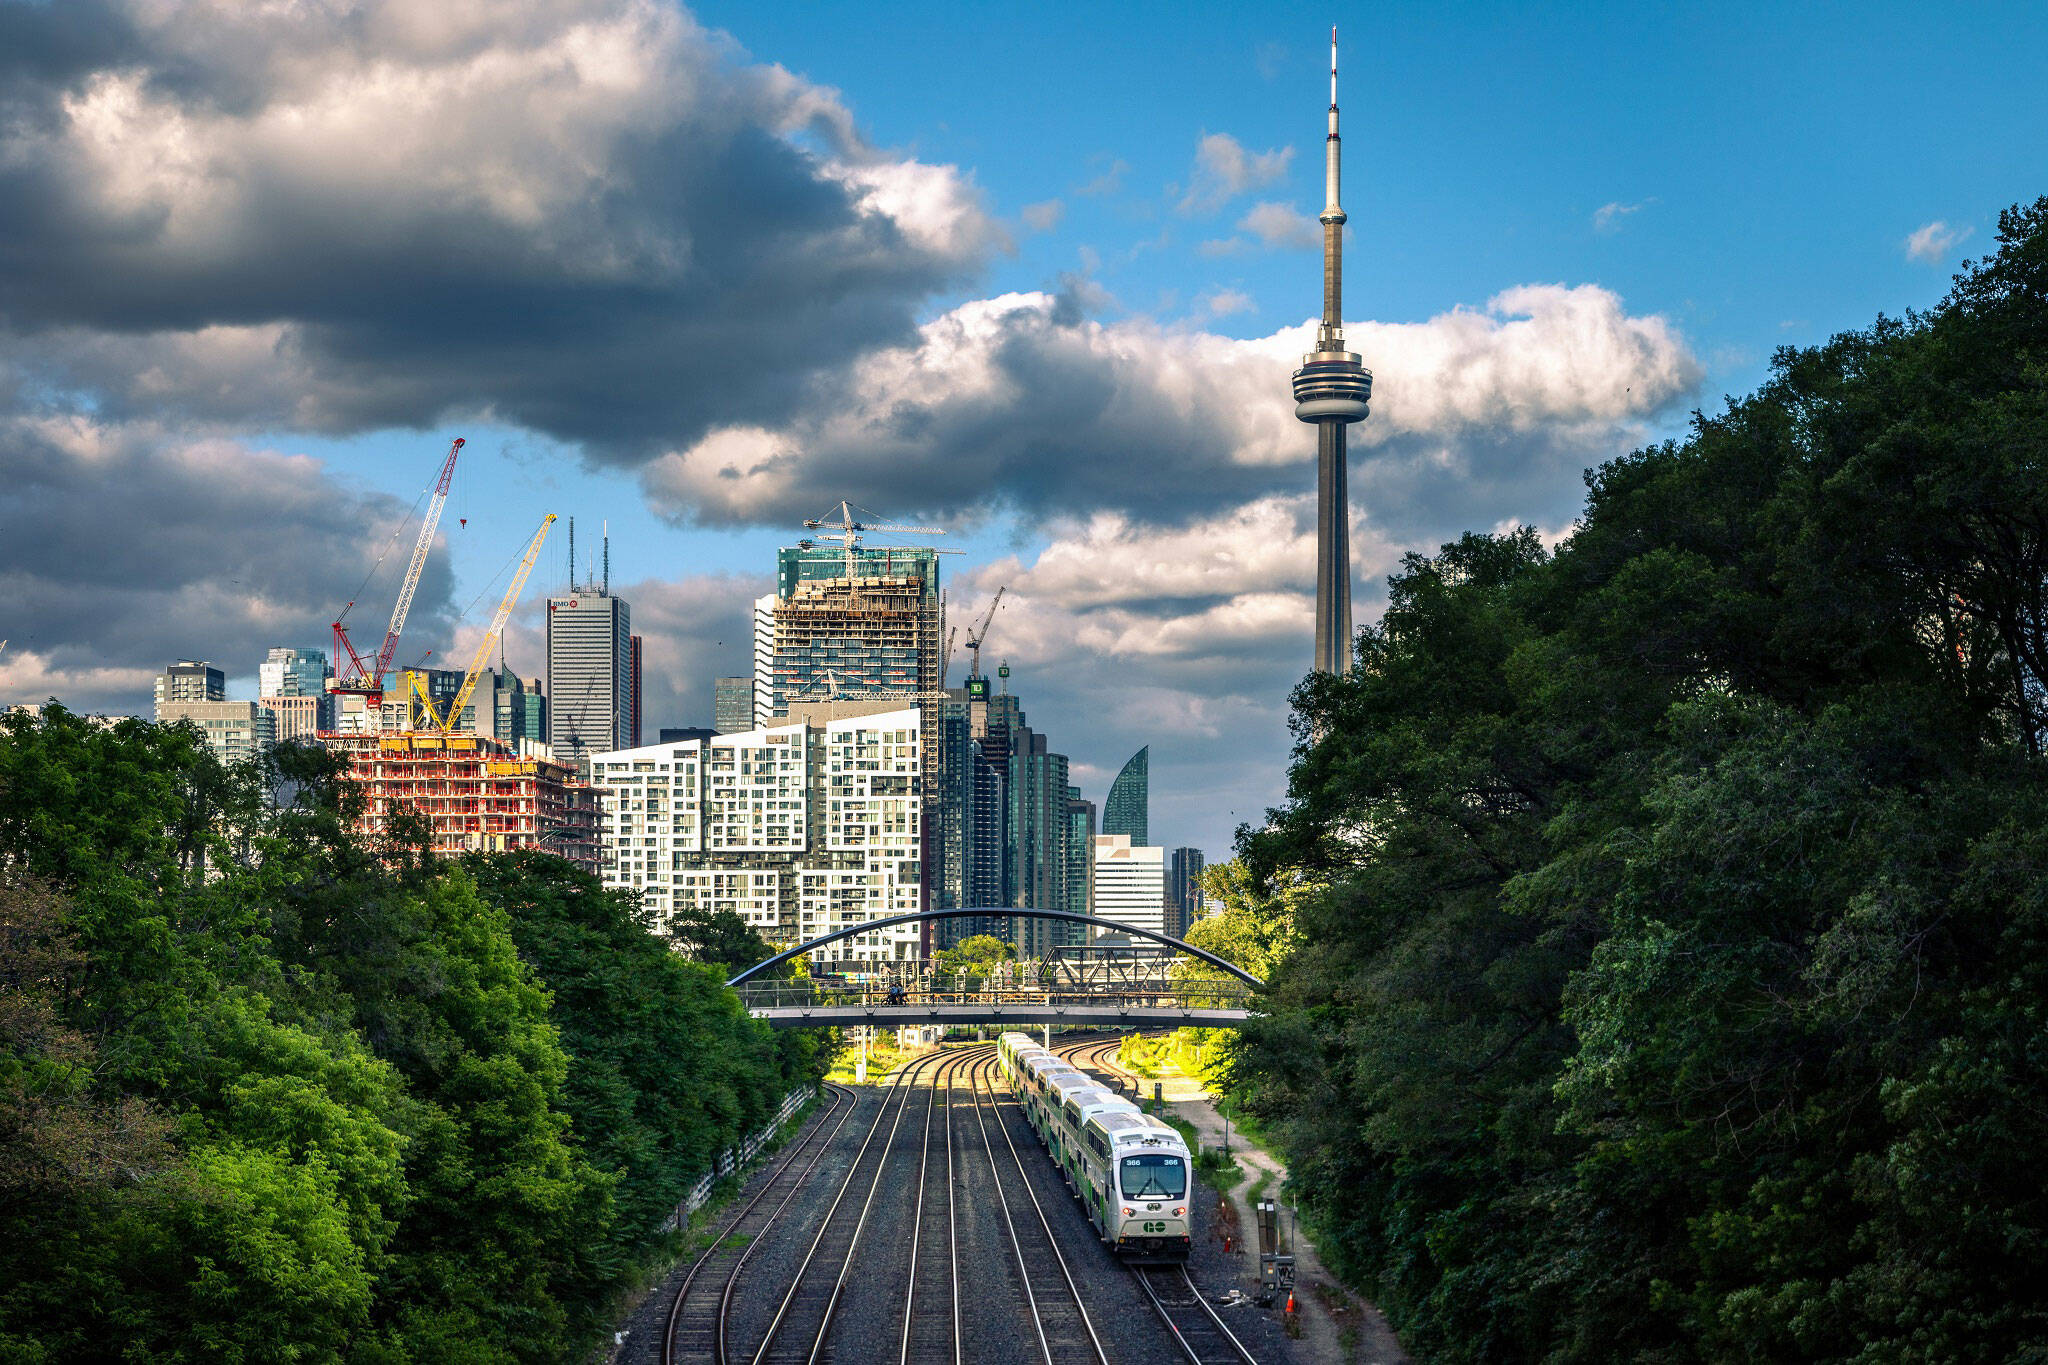 Toronto ranked the 8th most liveable city in the world